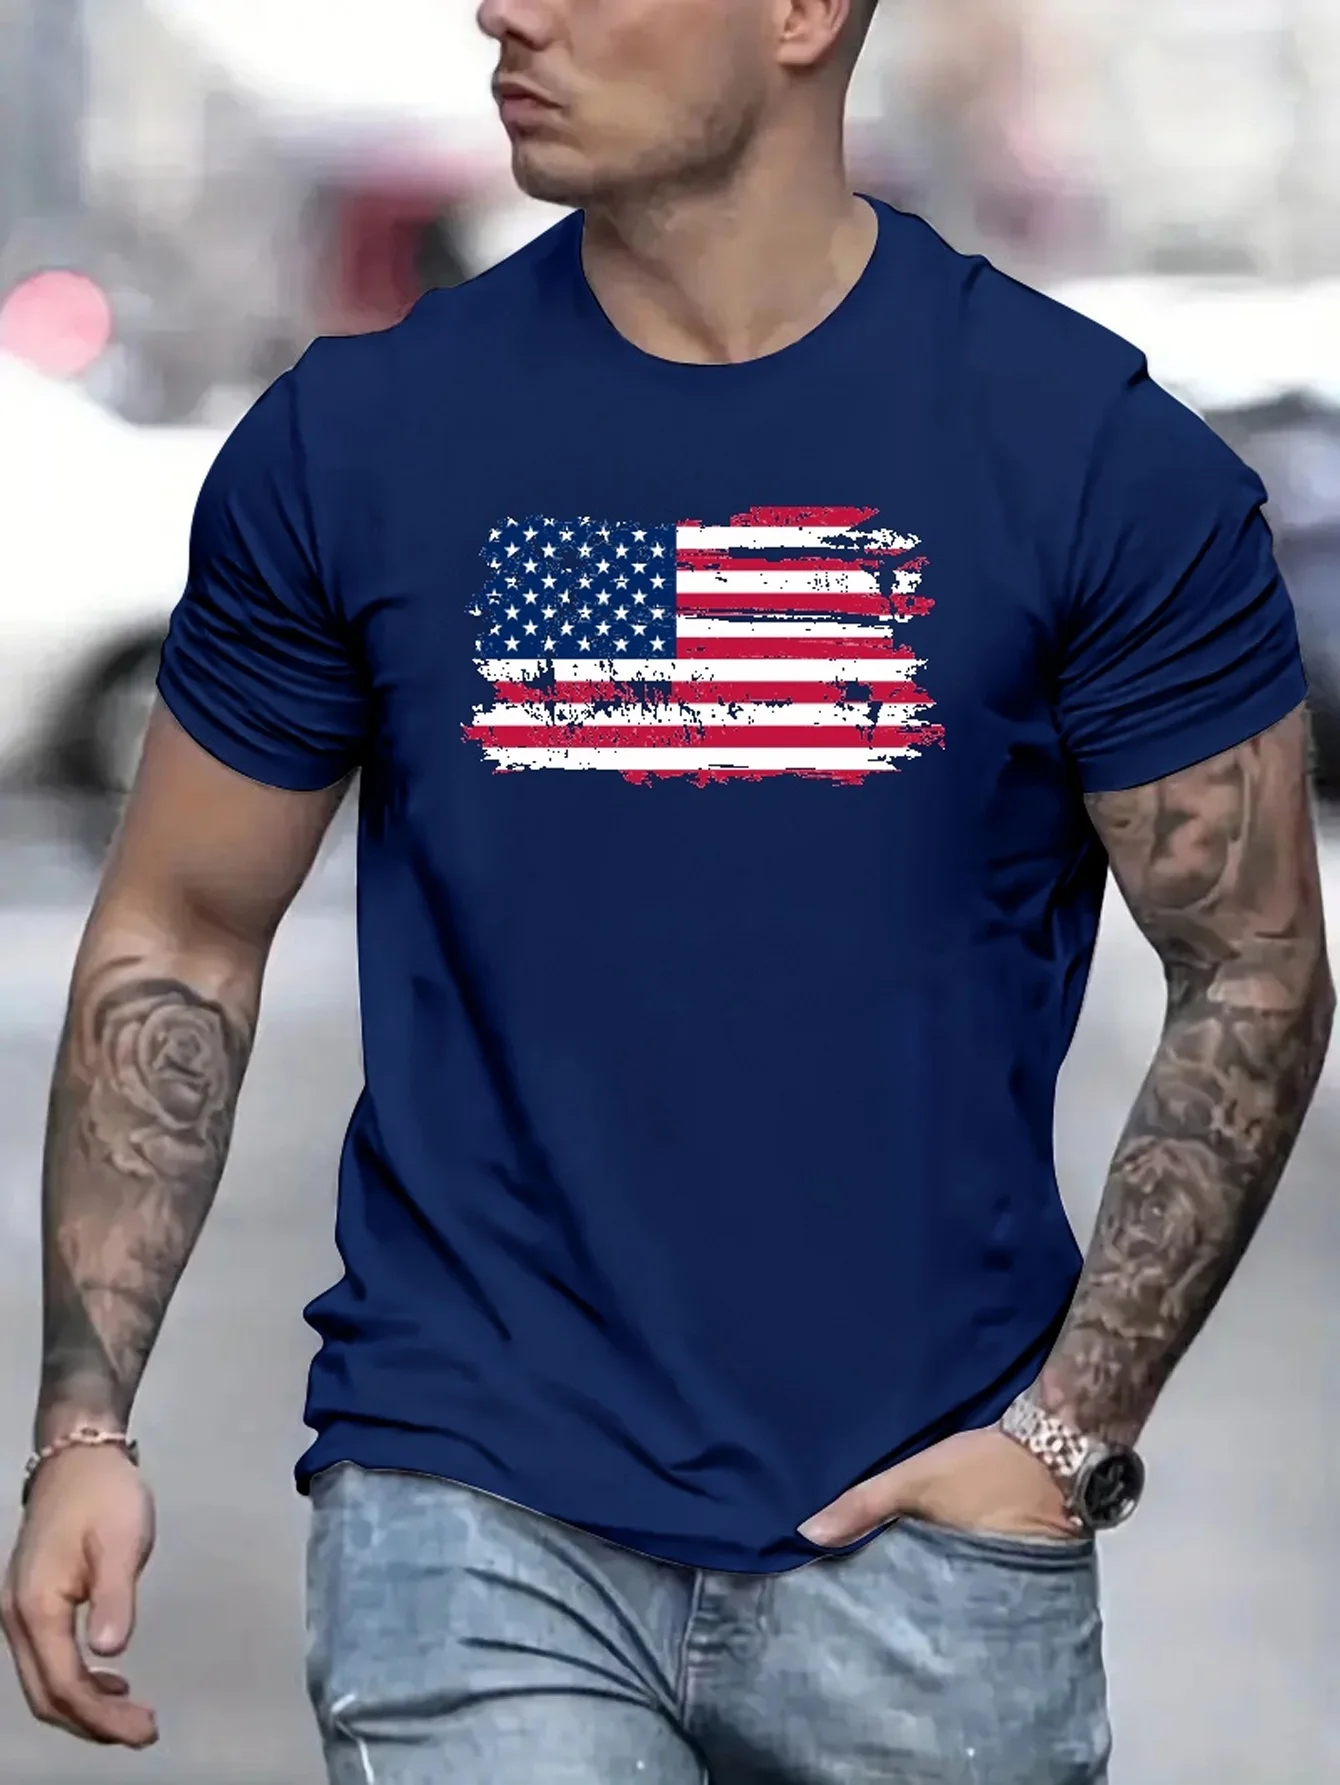 American Flag Men's Vintage T-shirt For Summer Outdoor, Casual Mid Stretch Crew Neck Tee Short Sleeve Graphic Stylish Top